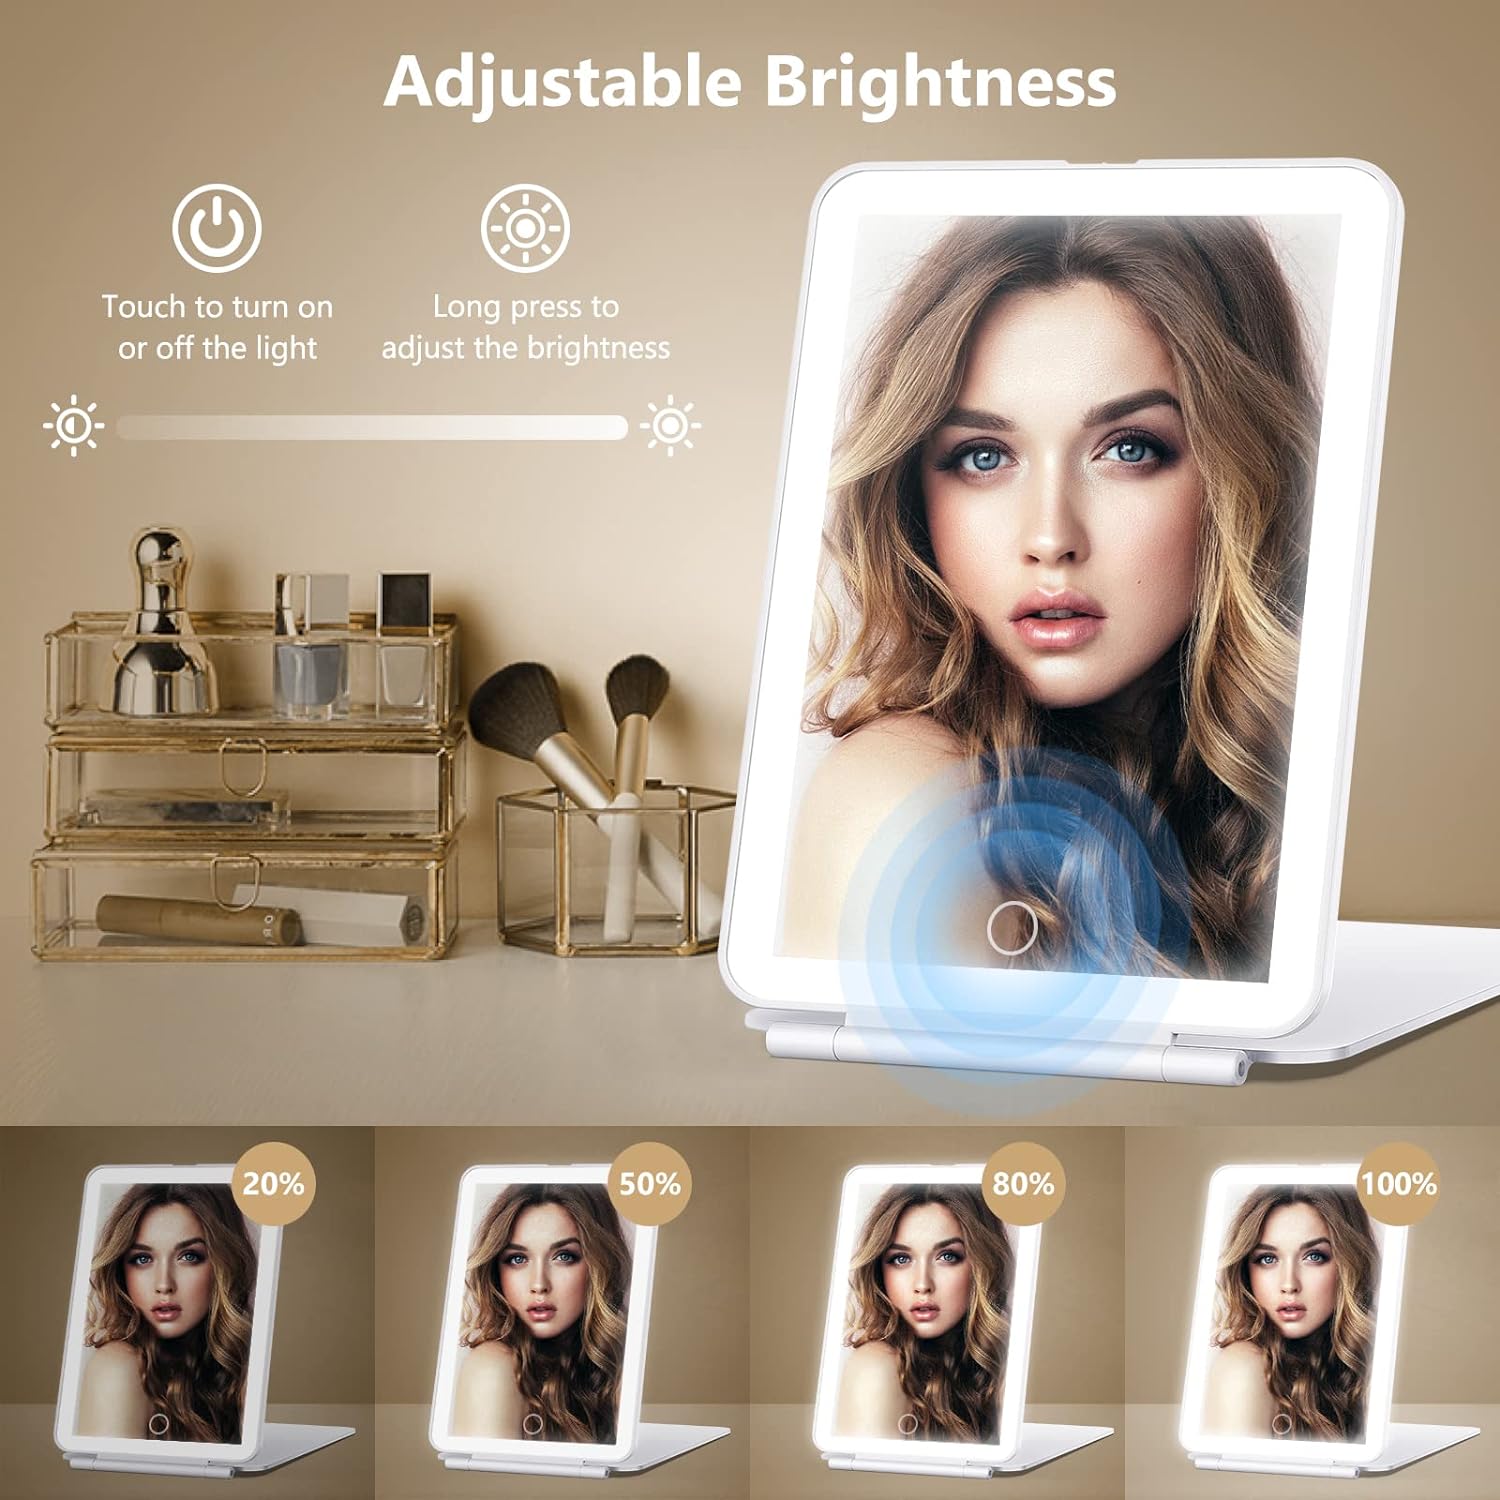 Portable Beauty Accessory with Exceptional Illumination Features